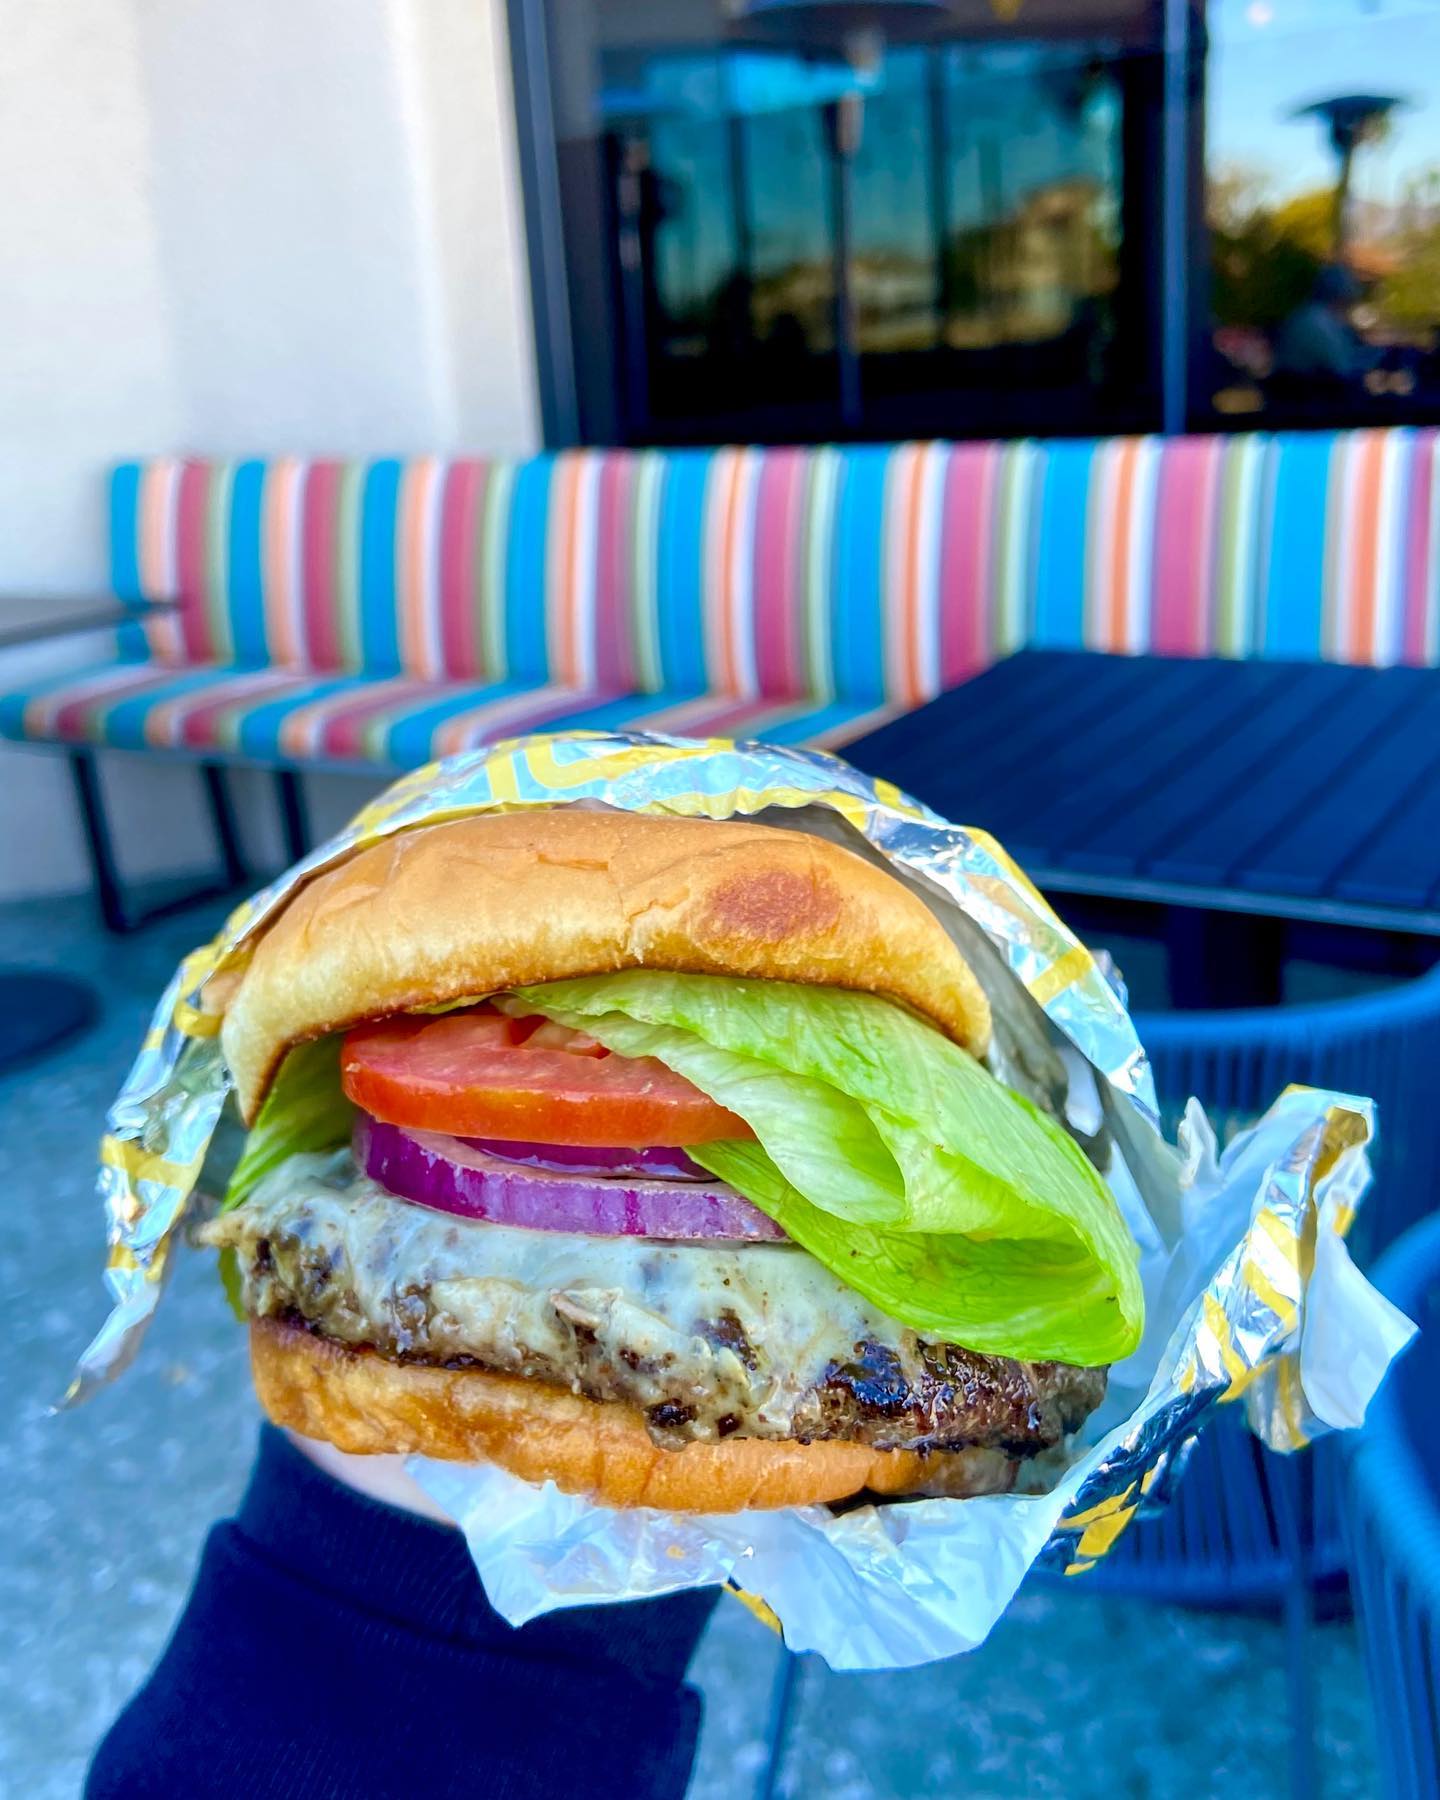 @woowooburgers is now available in Scottsdale! 🍔🤤 You can order online for pickup curbside at @eatztejas Scottsdale at WooWooBurgers.com or order for delivery on a 3rd party delivery.